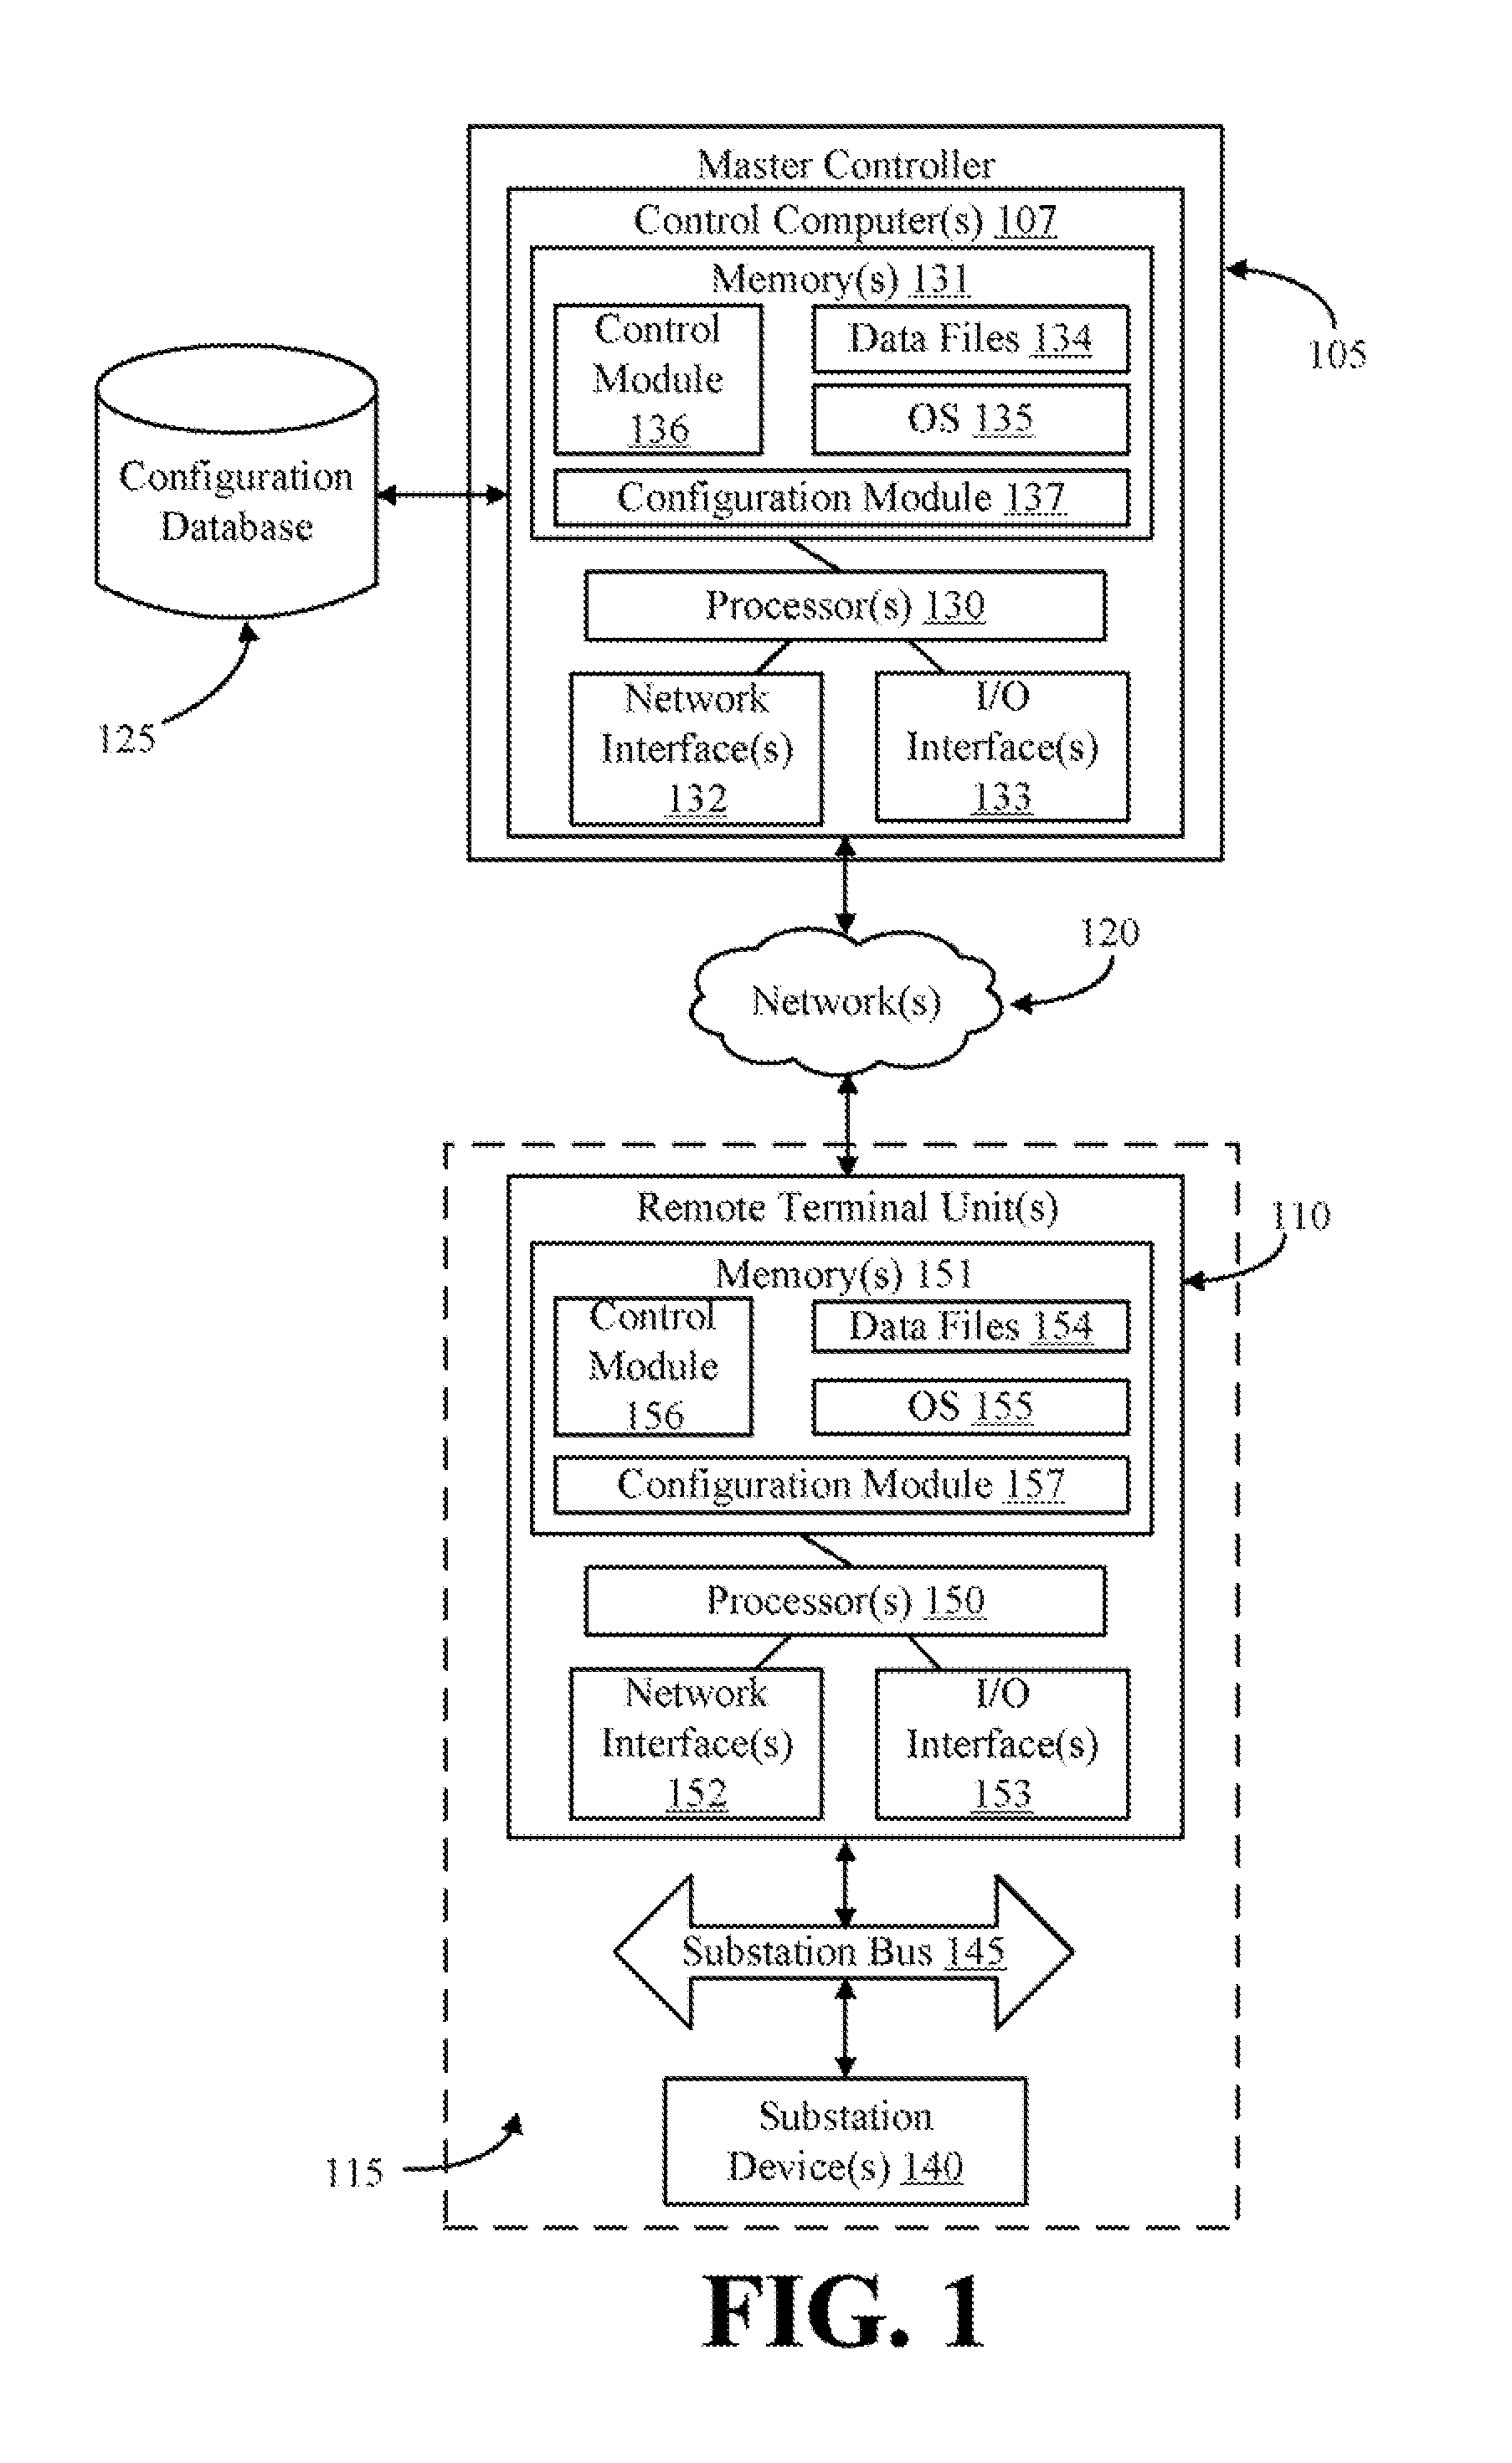 Systems and methods for the configuration of substation remote terminals with a central controller